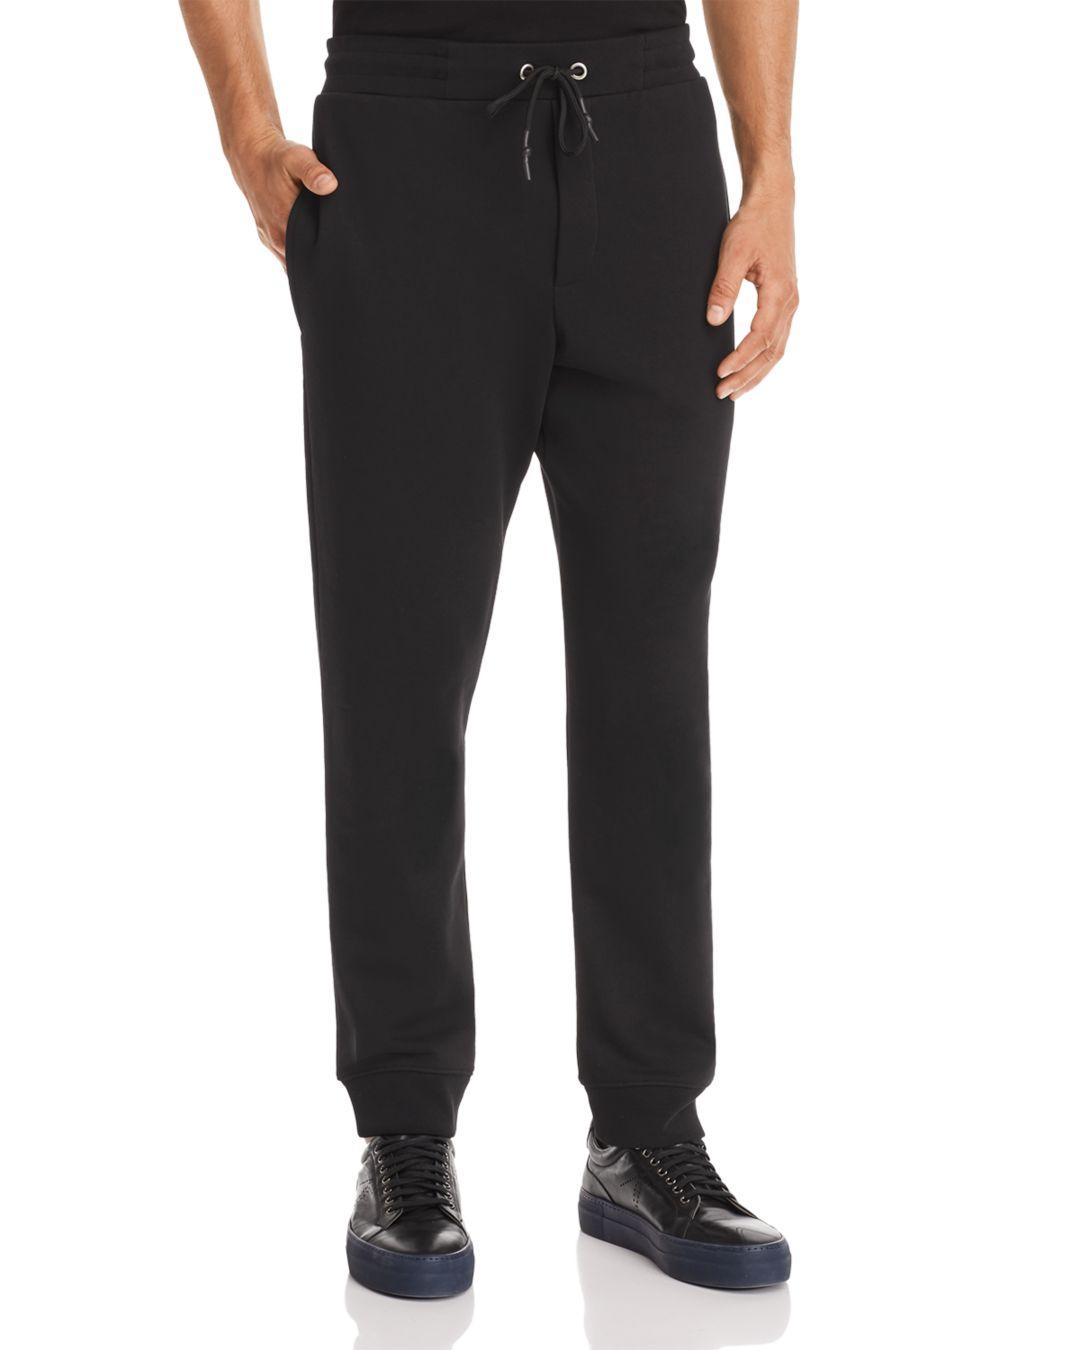 McQ Cotton Chester Jogger Pants in Black for Men - Lyst